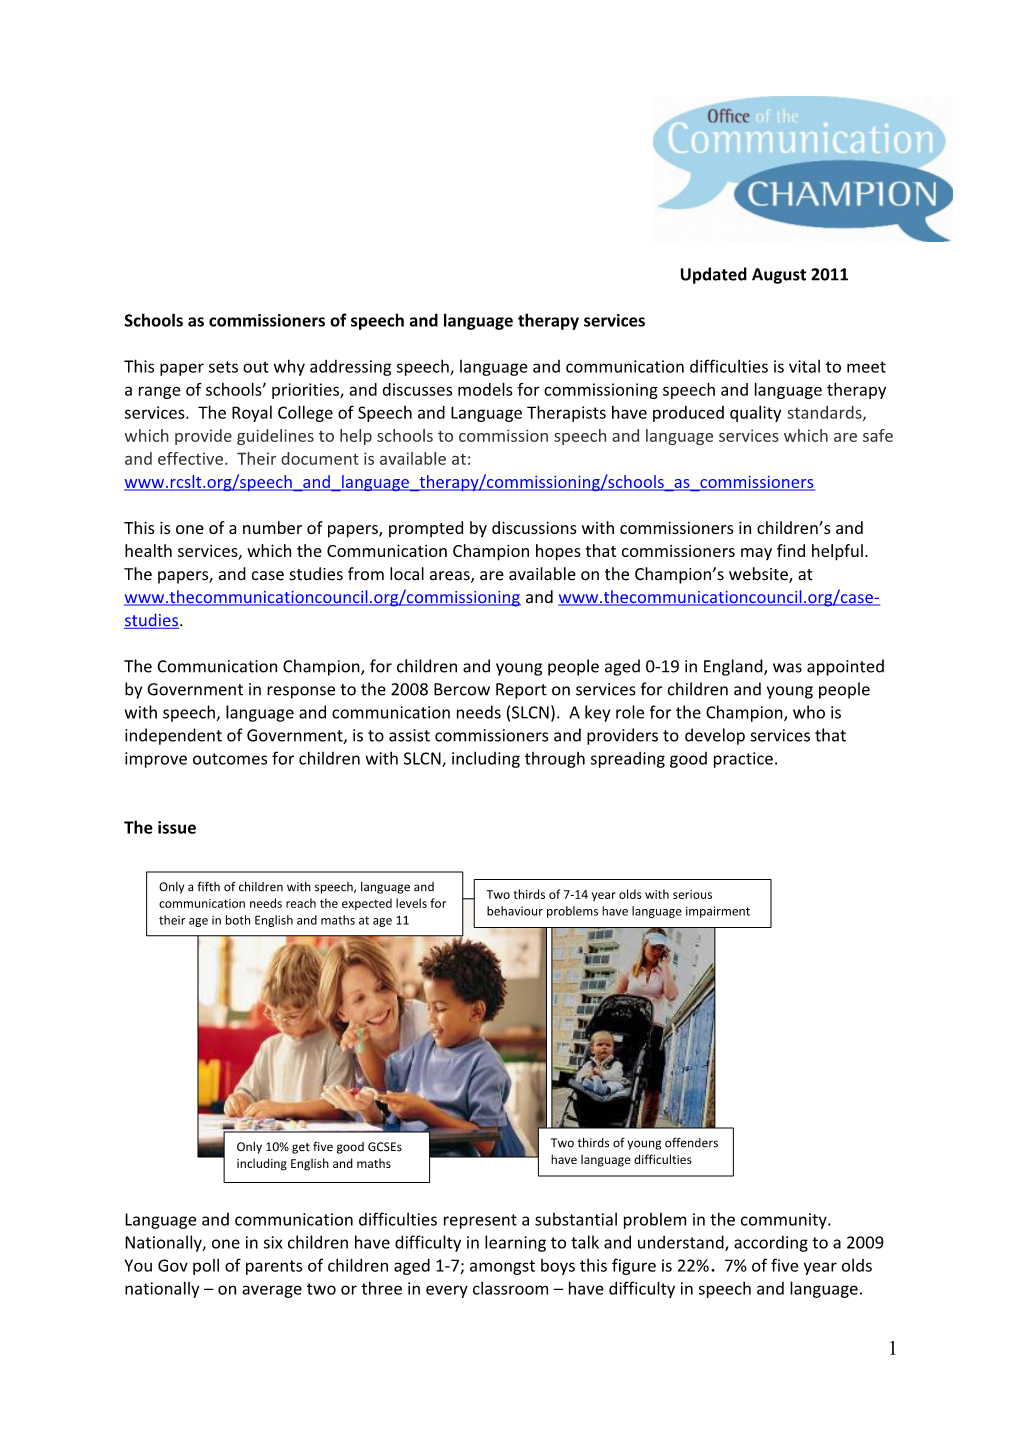 Schools As Commissioners of Speech and Language Therapy Services